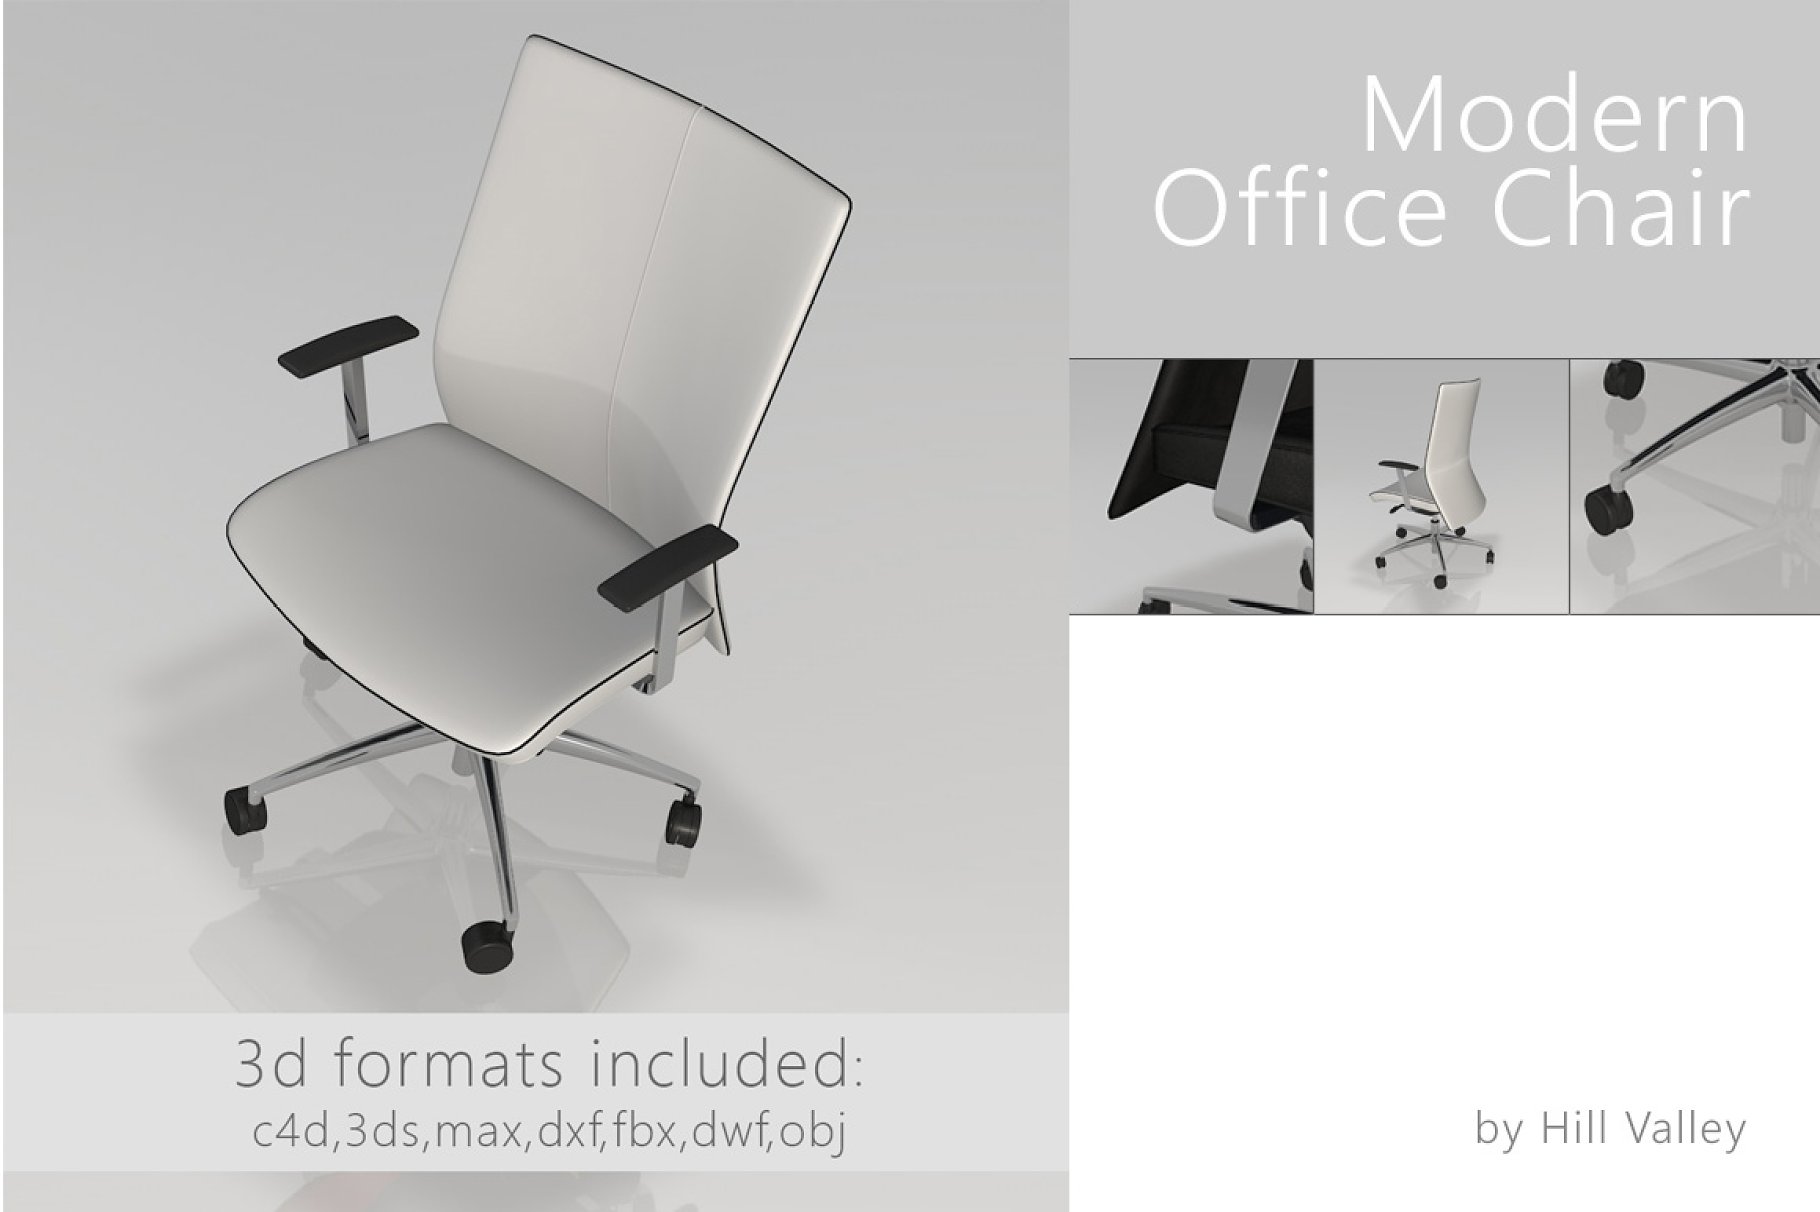 Gray image of office chairs.